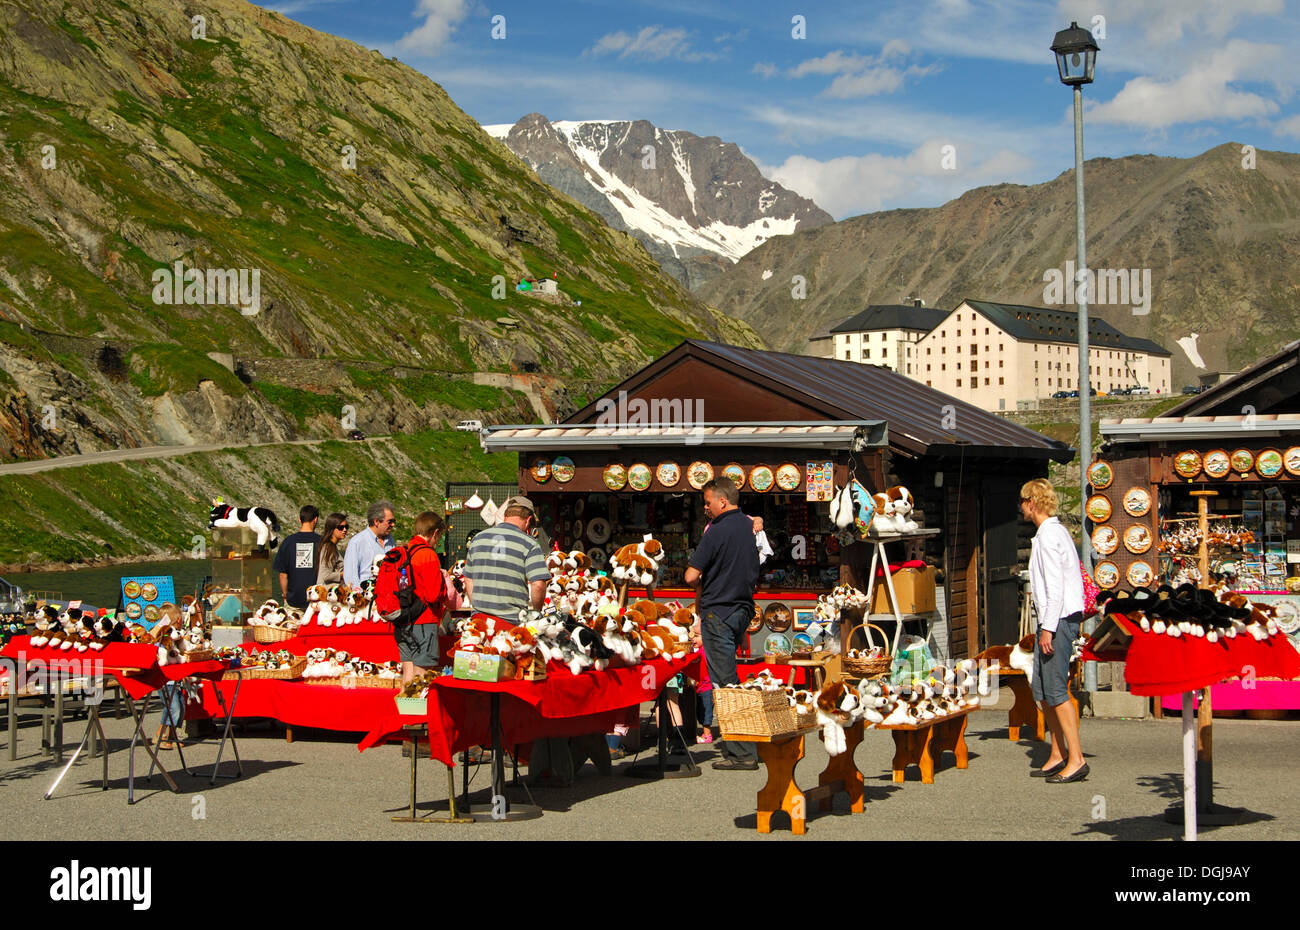 Souvenir stands with St. Bernard dogs soft toys, Italian side of the Great St. Bernard Pass, Italy, Europe Stock Photo